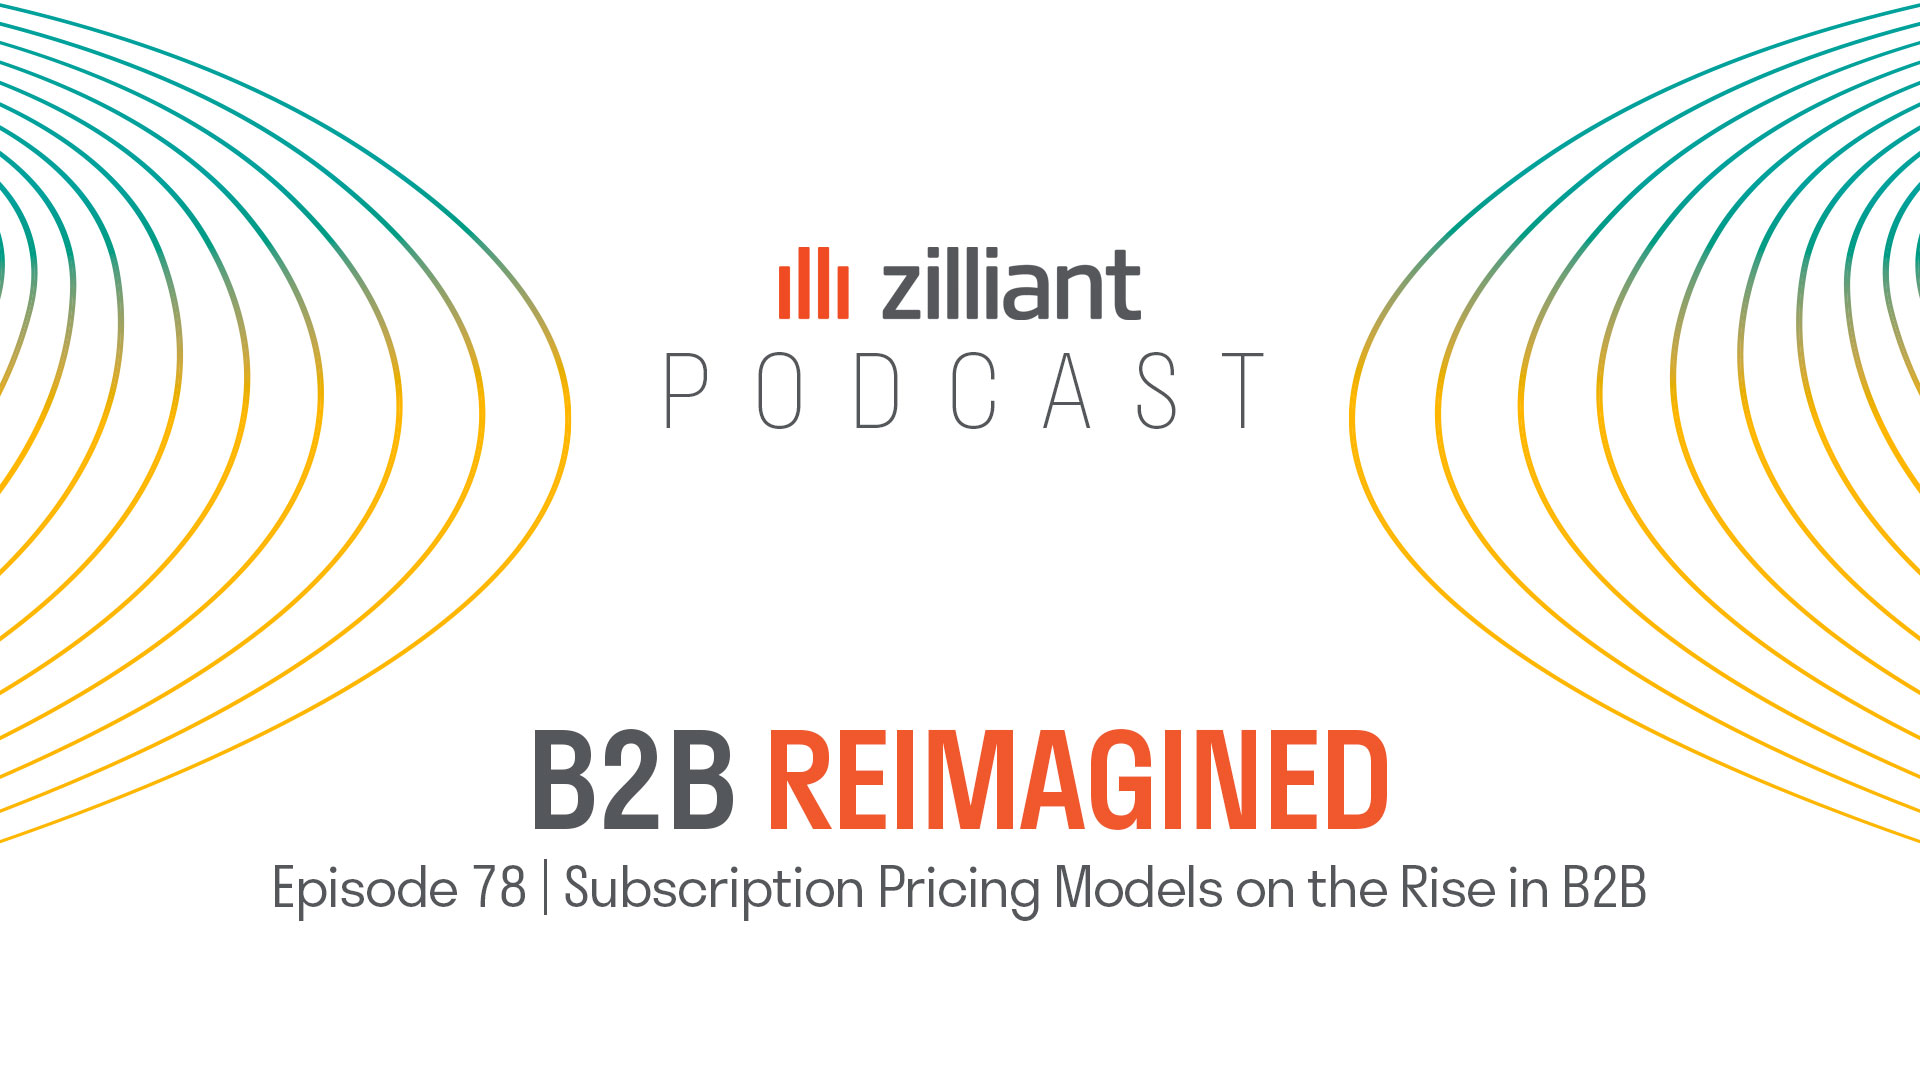 Subscription Pricing Models on the Rise in B2B